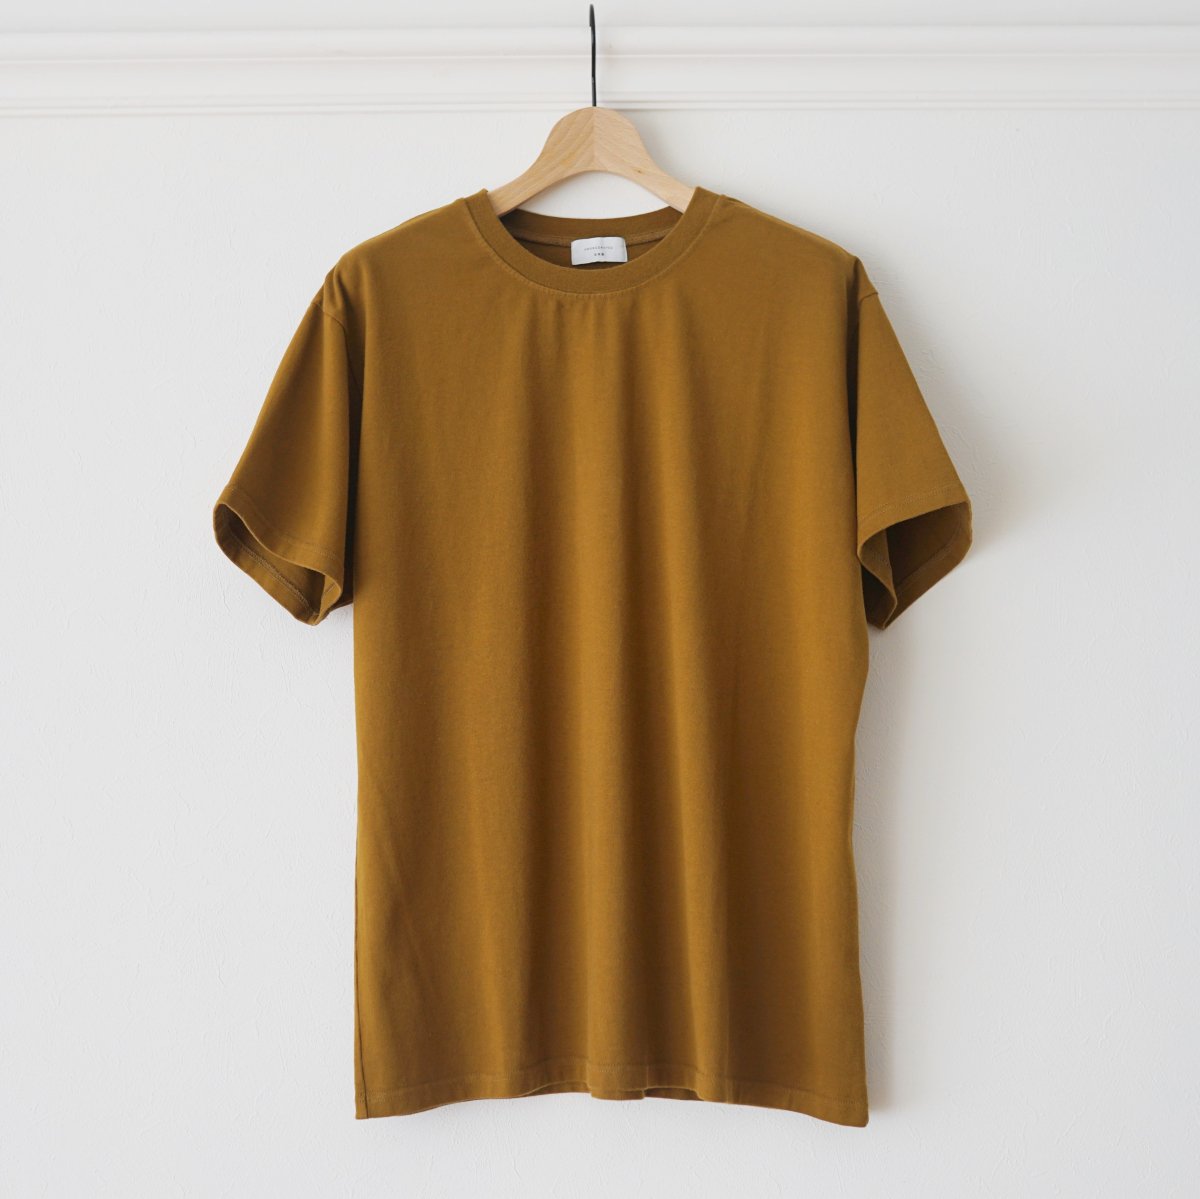 【※MEMBER CAMPAIGN】【UNDECORATED アンデコレイテッド】ORGANIC CO S/S TEE - BROWN